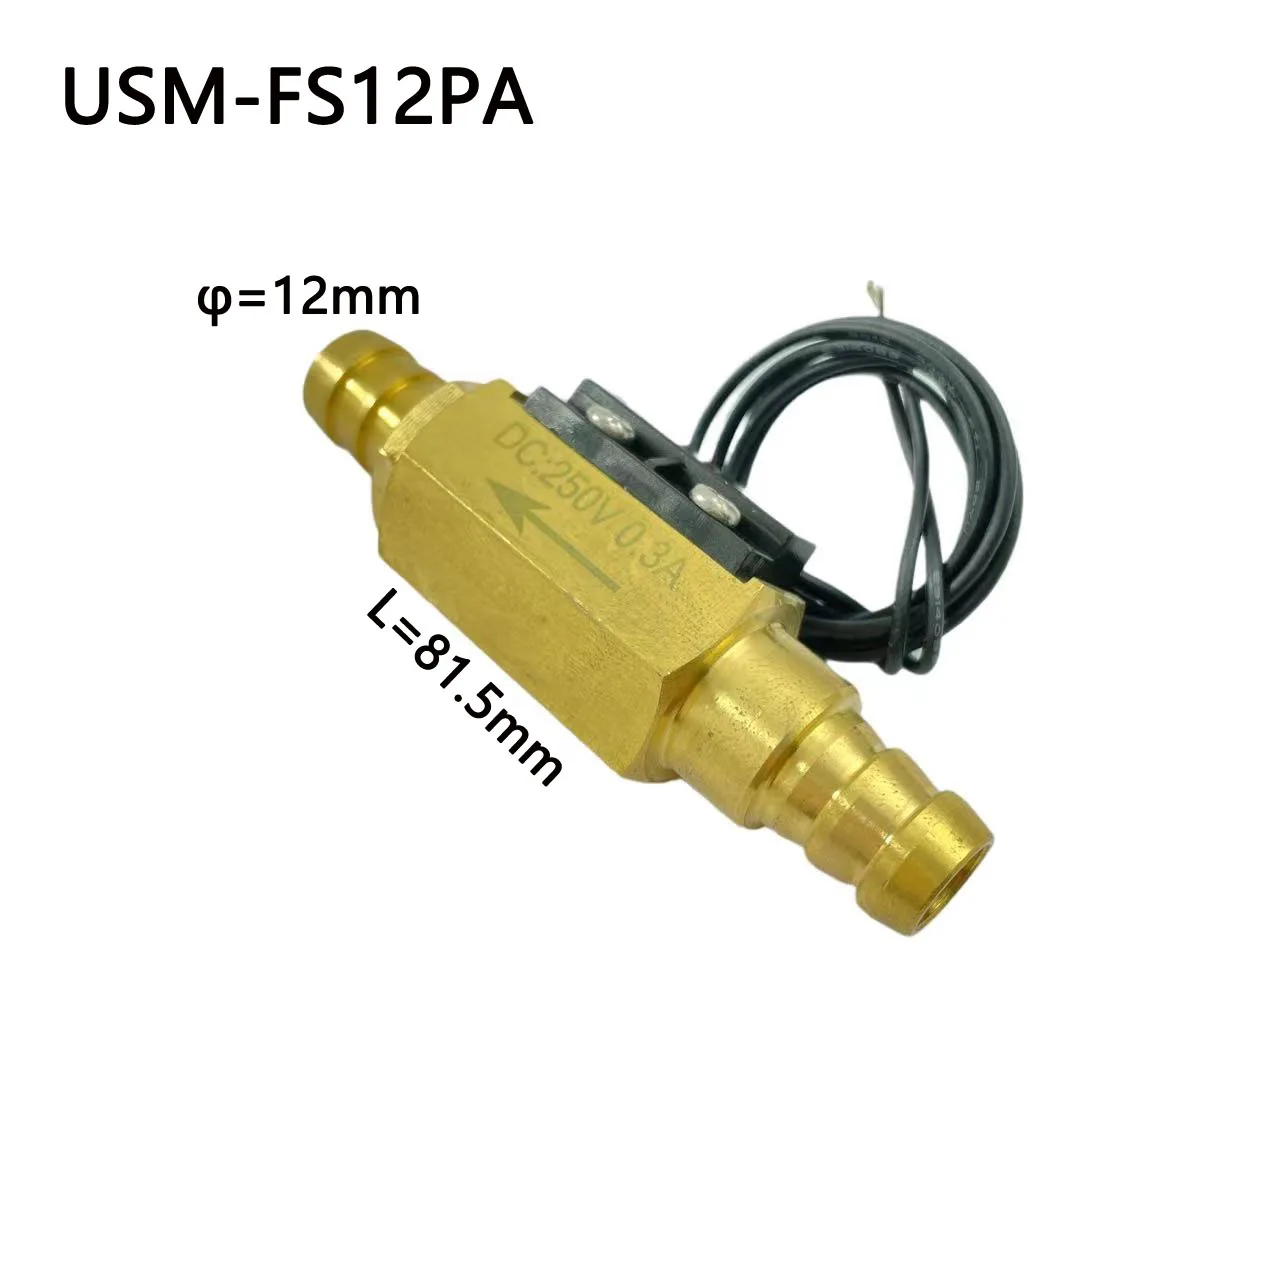 

USM-FS12PA Normally open Circuit Magnetic Flow Switch 0.3A Max Load DC250V AC220V Max Reliable 8mm OD Plug made of Brass